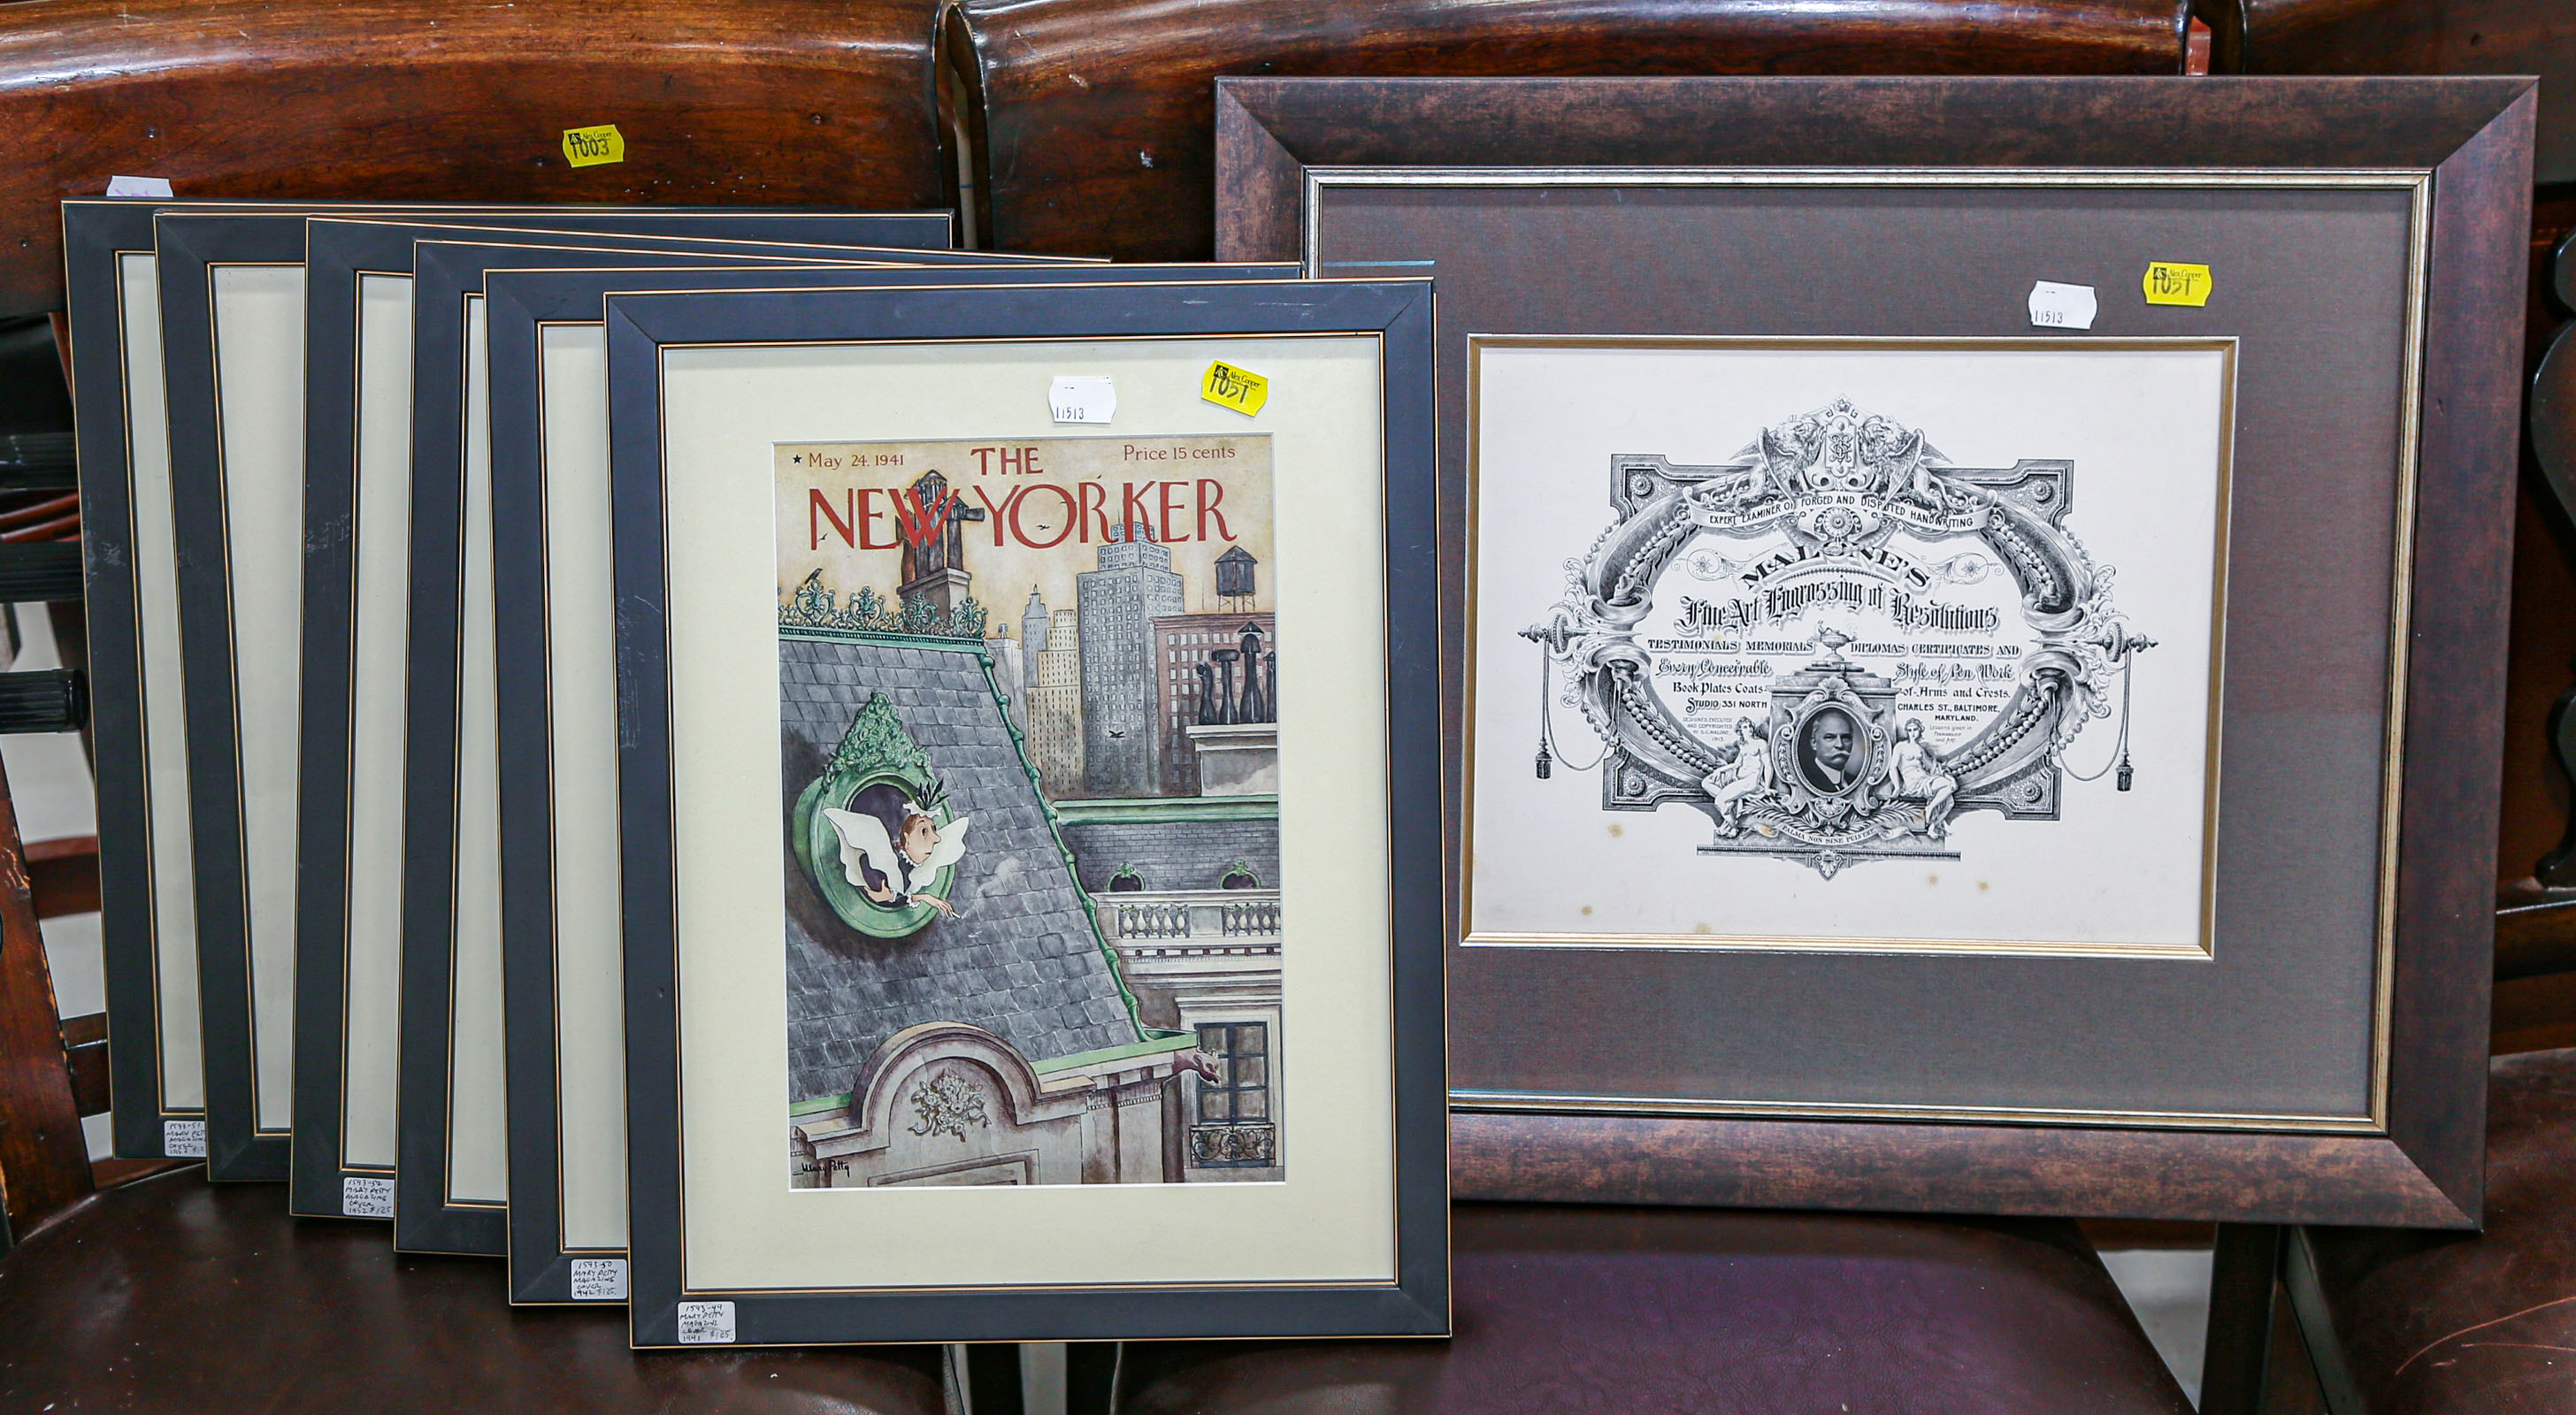 SIX NEW YORKER FRONT COVERS; A